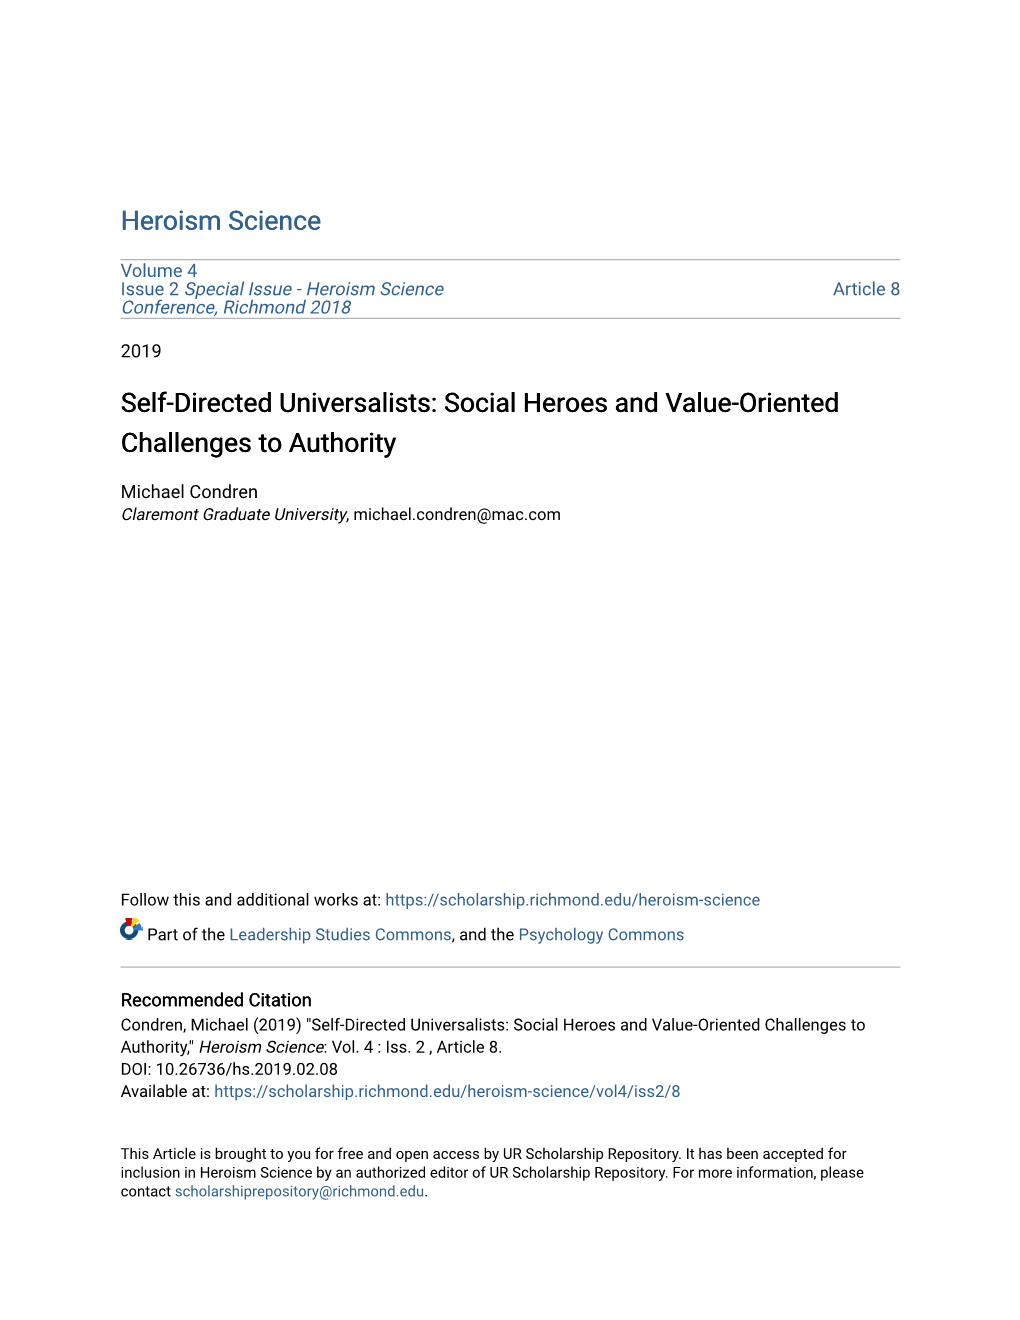 Social Heroes and Value-Oriented Challenges to Authority